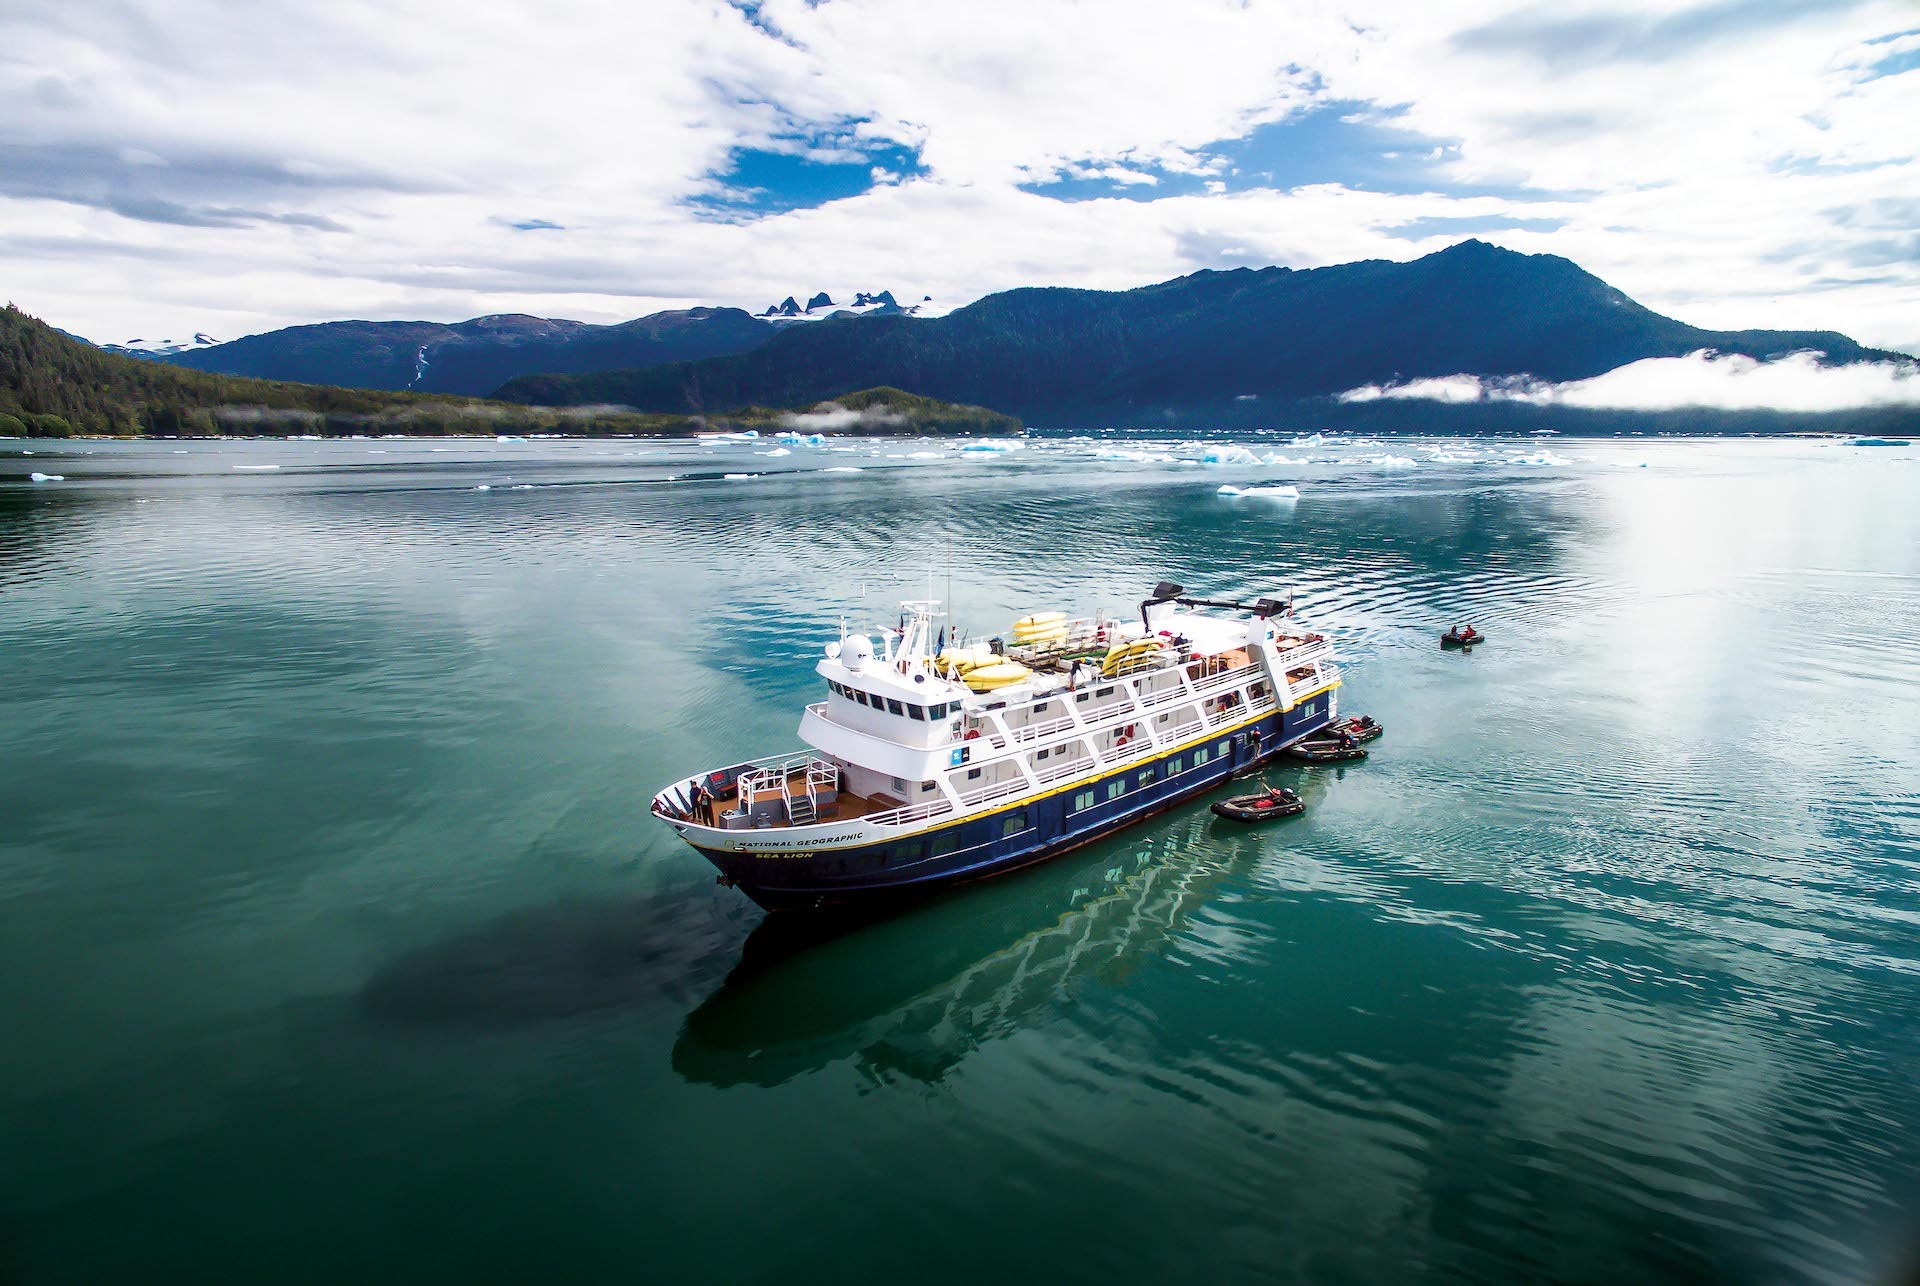 Lindblad Expeditions-National Geographic has announced plans to add additional voyages to its 2021 season in Alaska this summer.  